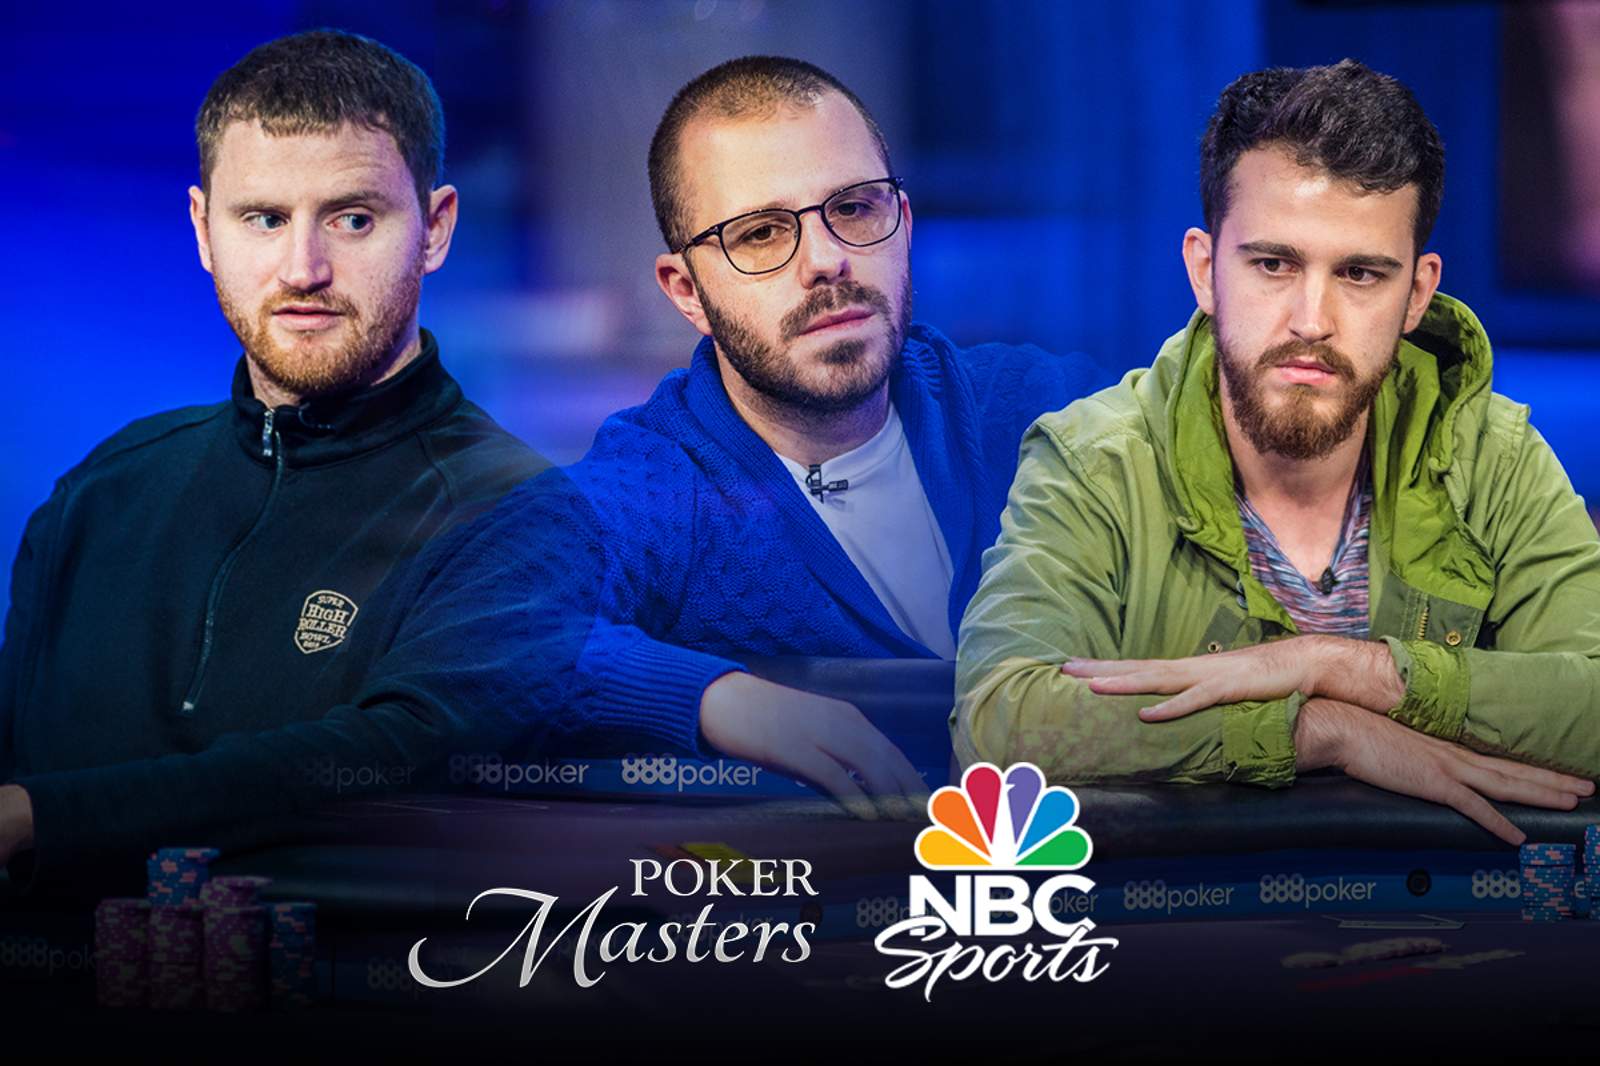 The Poker Masters Action Continues on NBC Sports Tonight